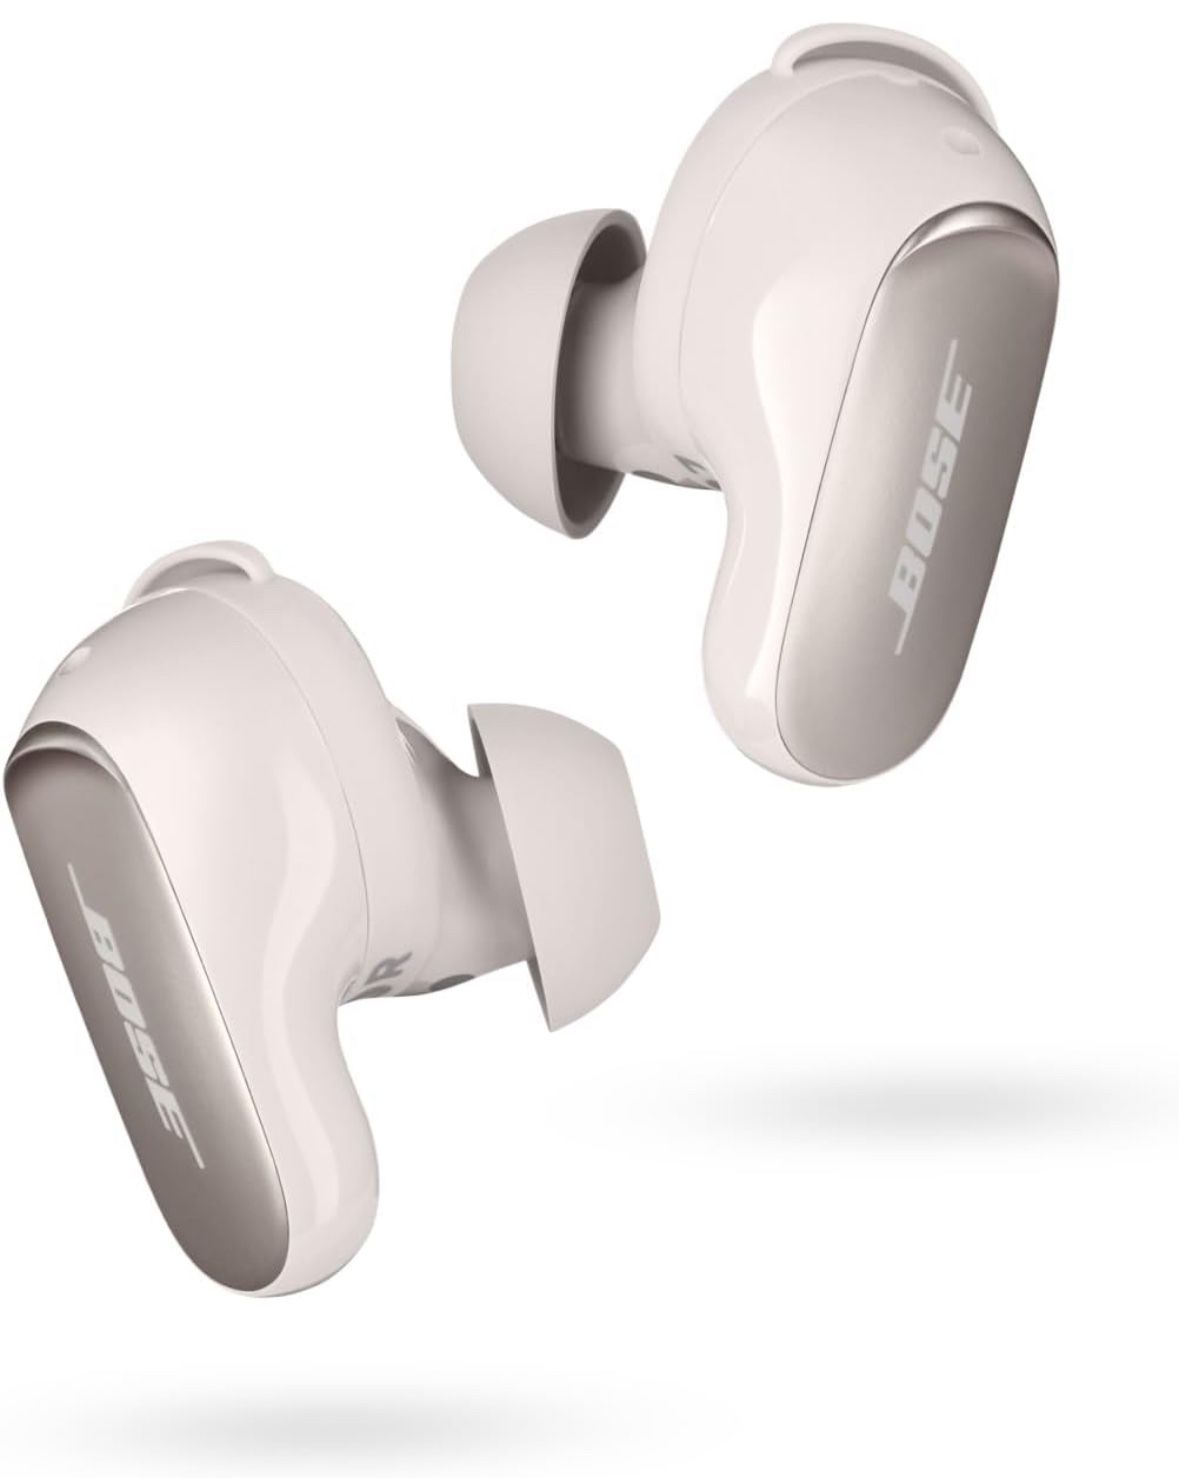 Bose Quietcomfort Ultra Earbuds $309 +taxes Retail